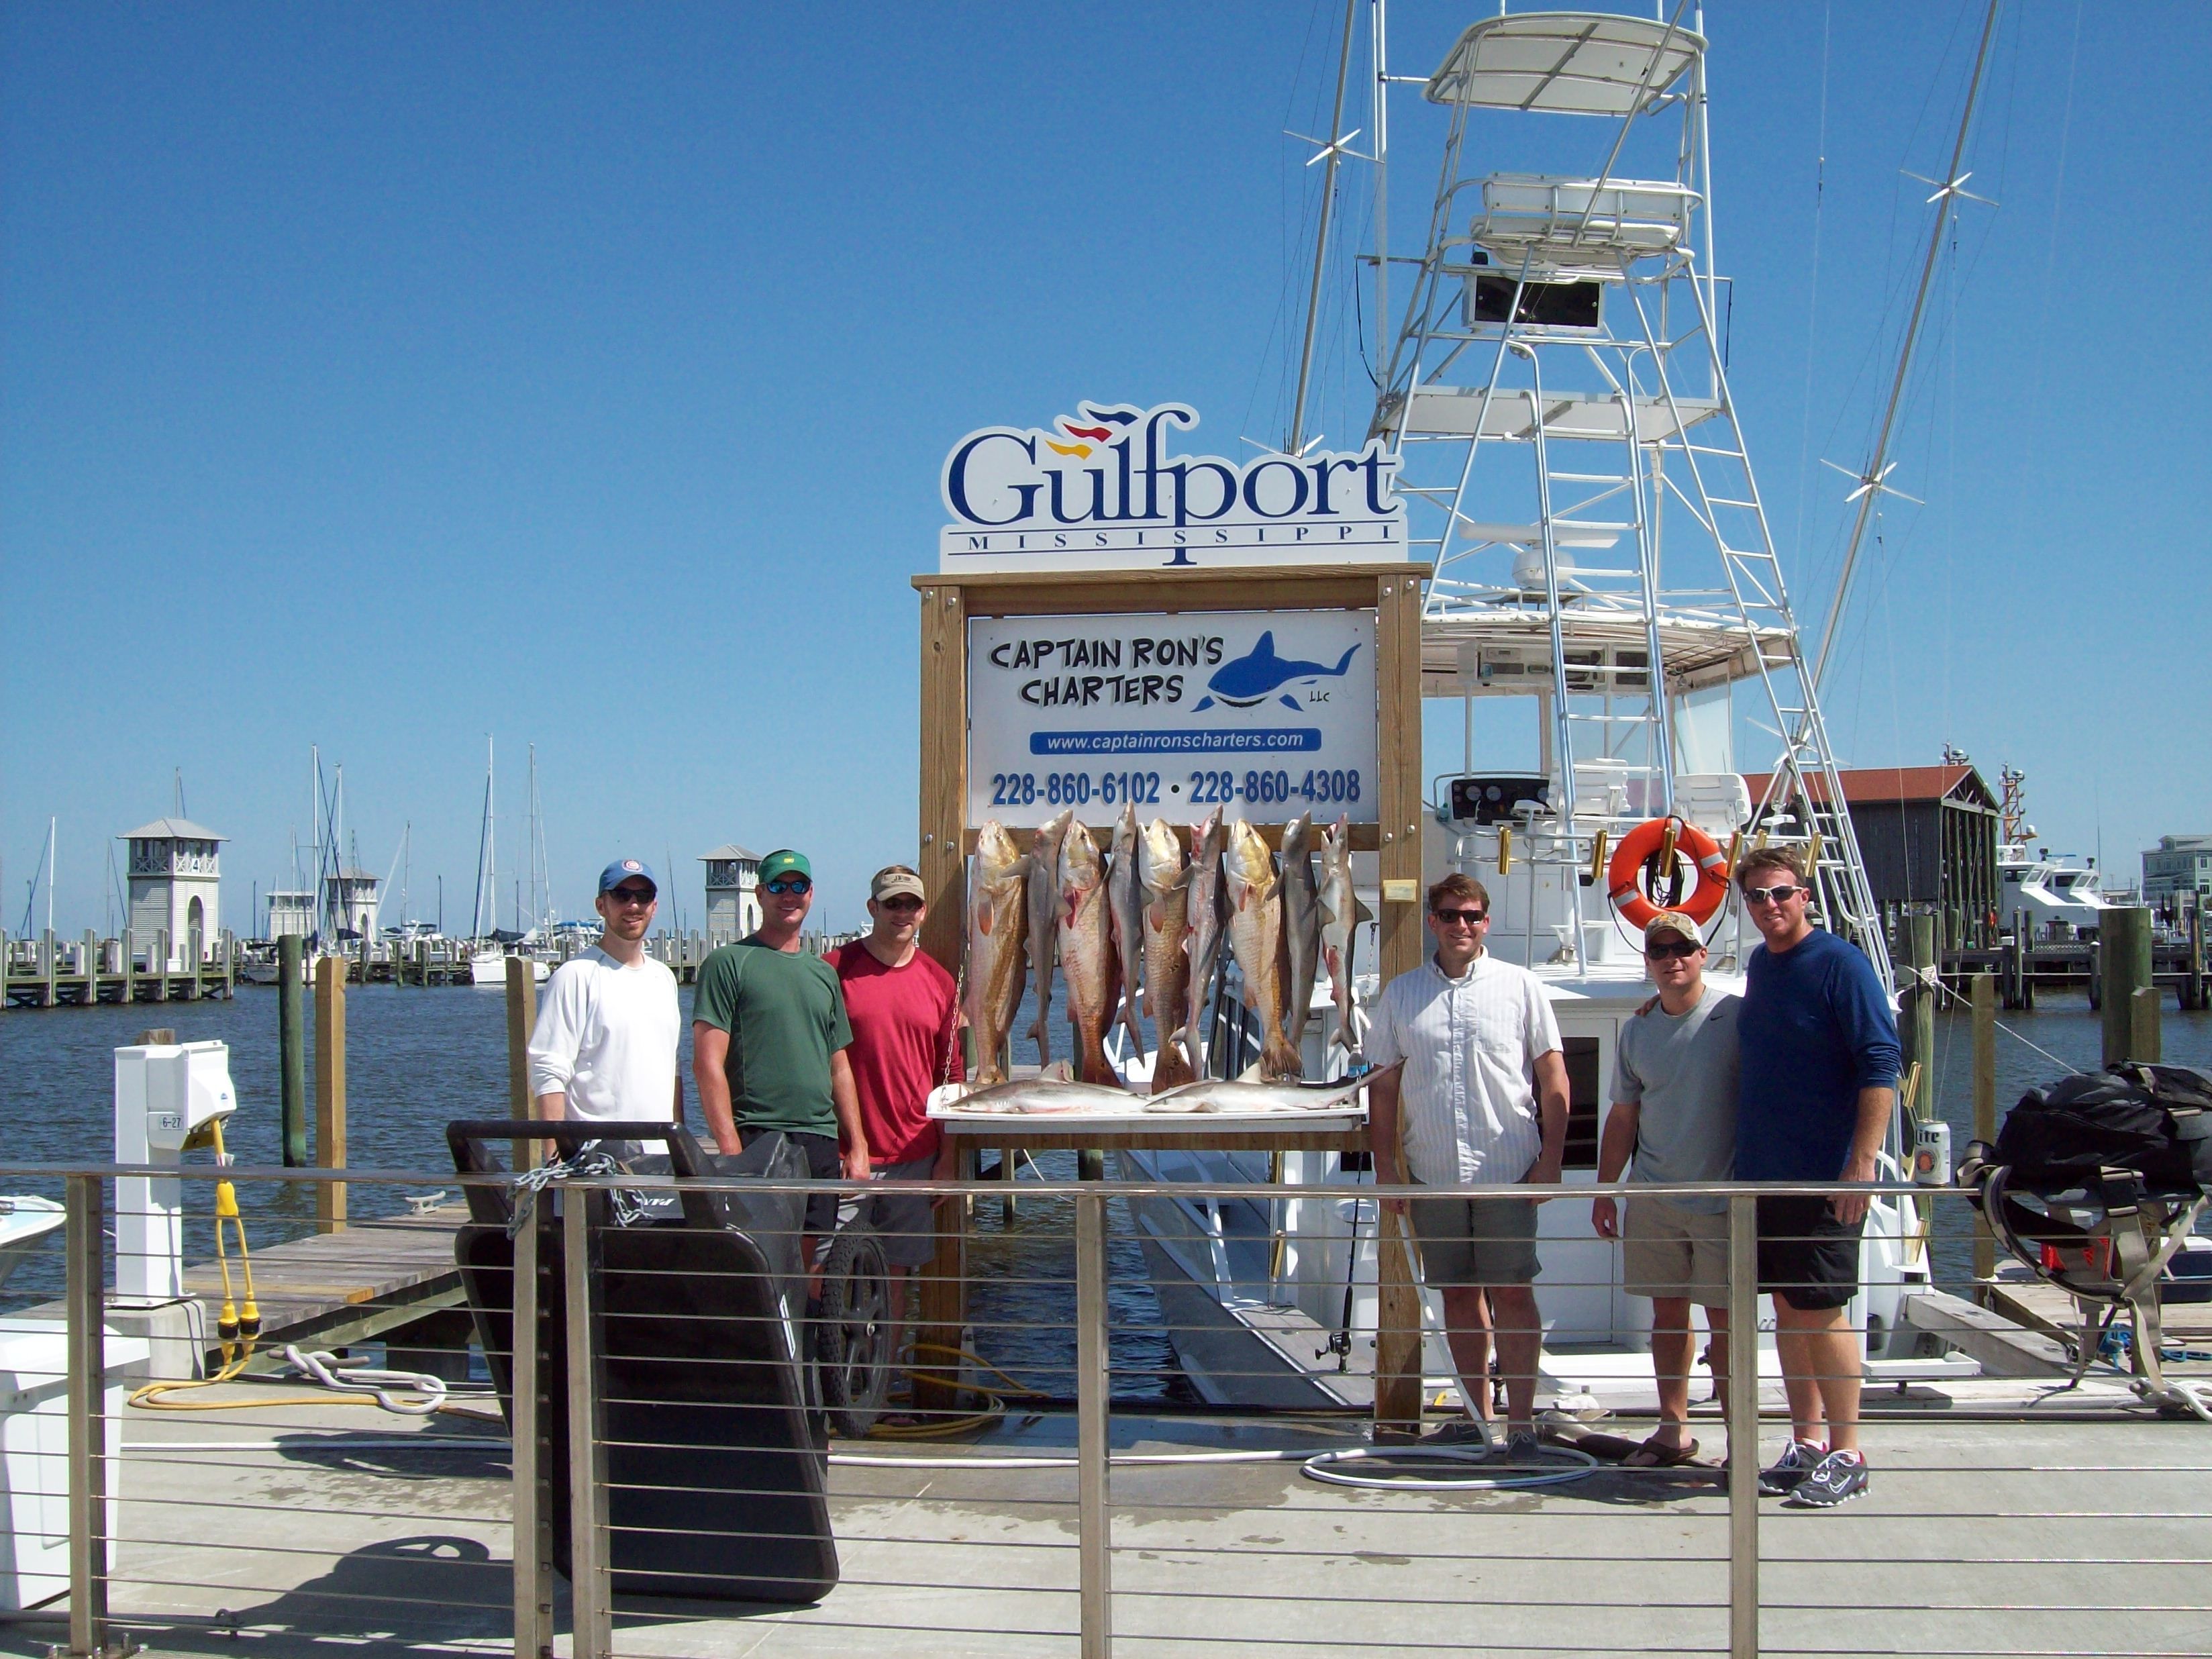 Captain Ron's Charters Mississippi: "On Strike" 6 Hour Offshore